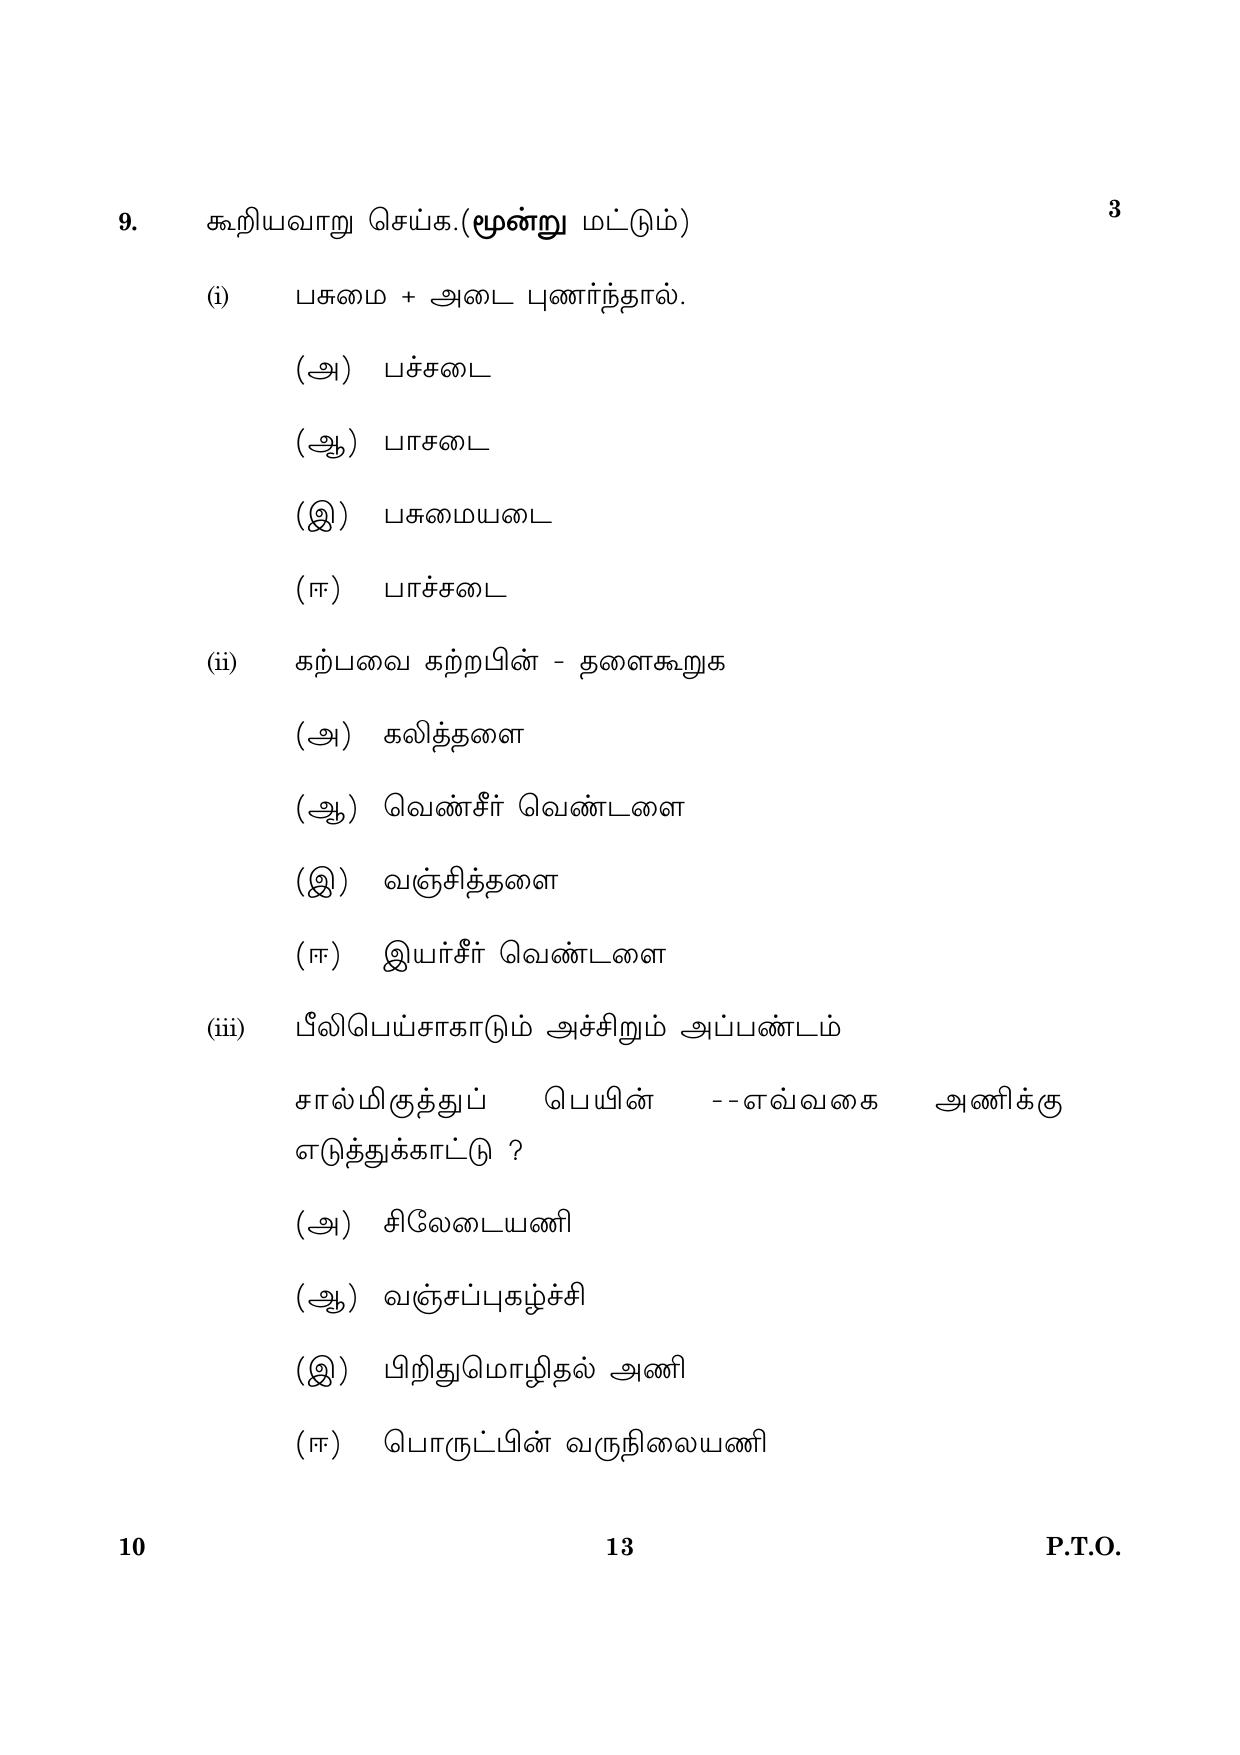 CBSE Class 10 010 Tamil 2016 Question Paper - Page 13